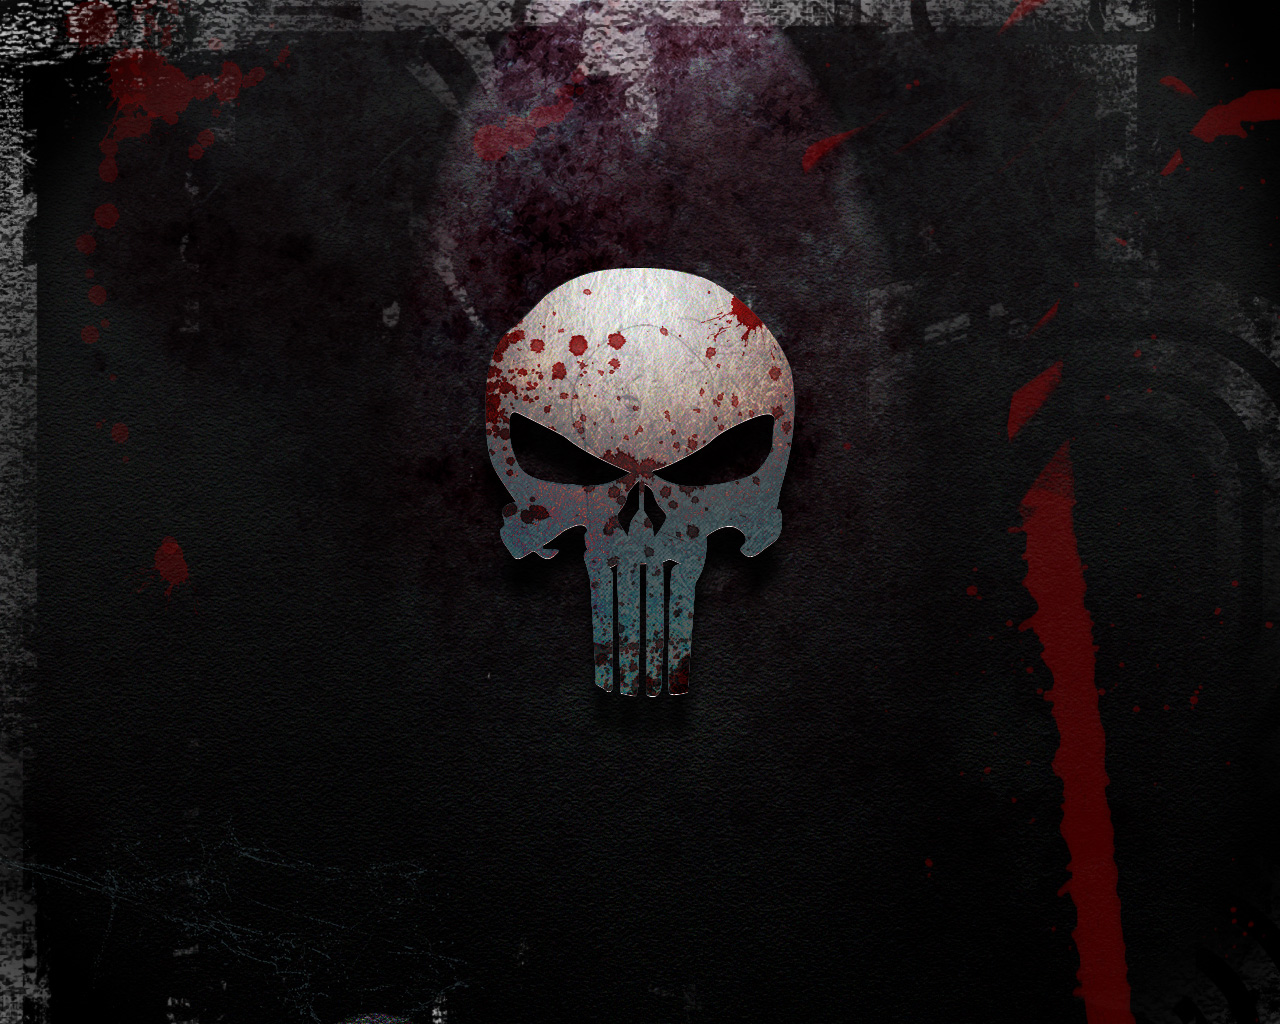 The Punisher Grungy by Juanjolopezv on